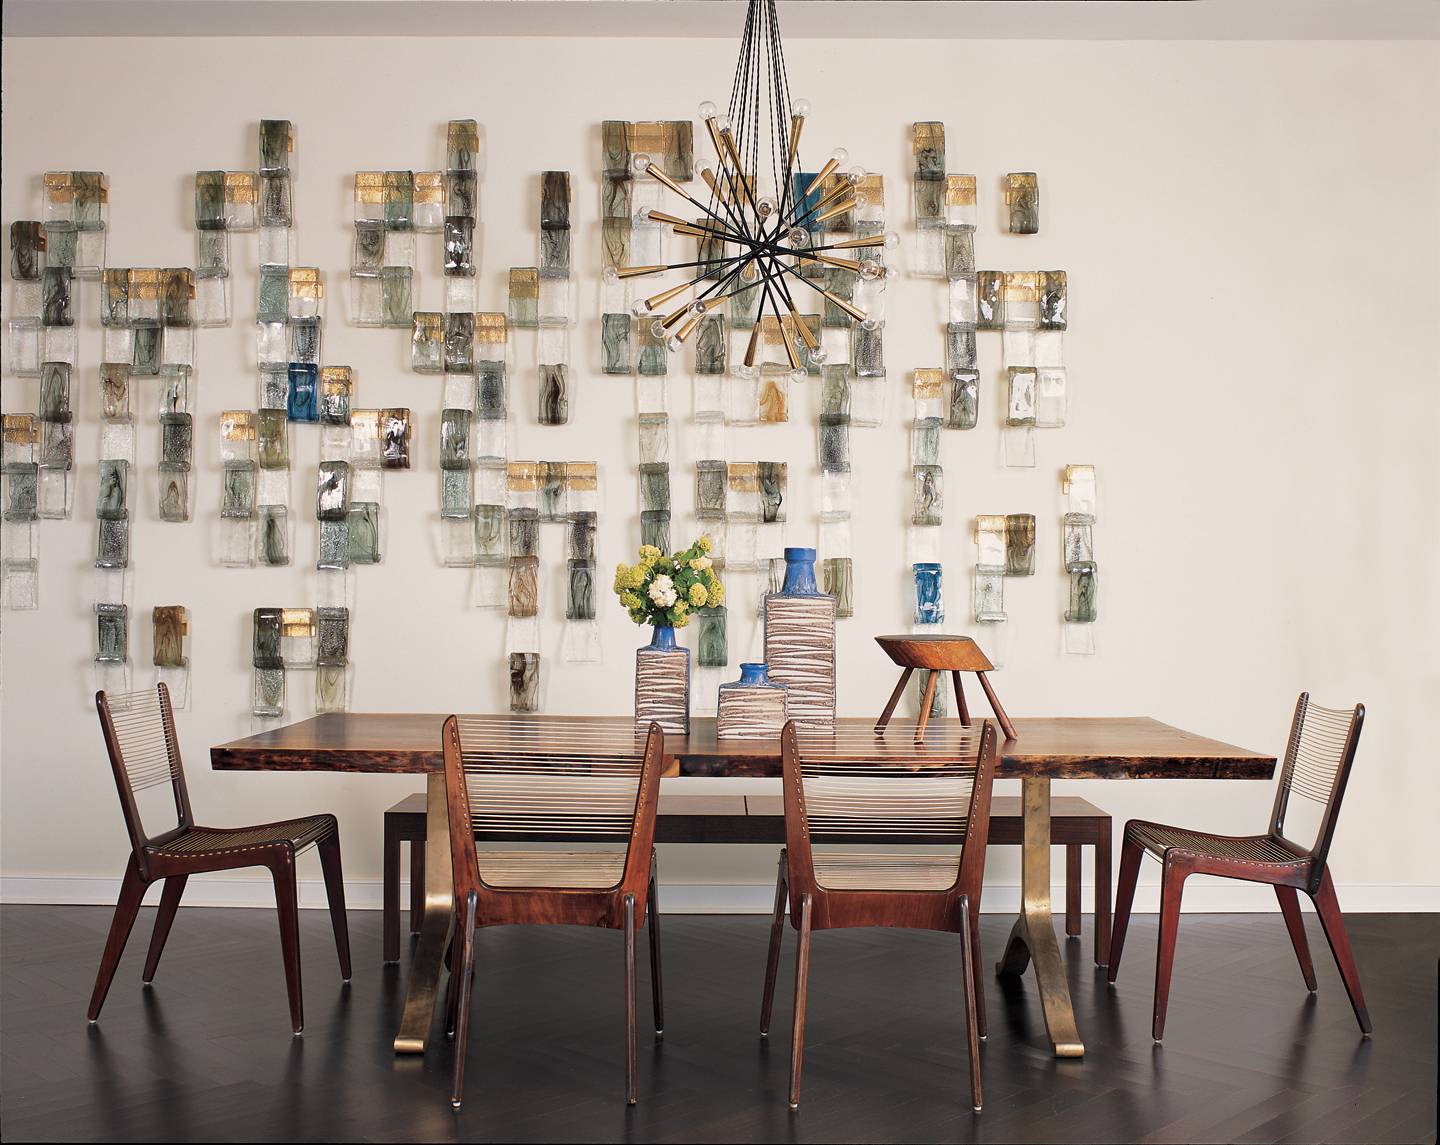 Brutalist wall hanging in a dining room interior designed by Amy Lau on Central Park West in New York